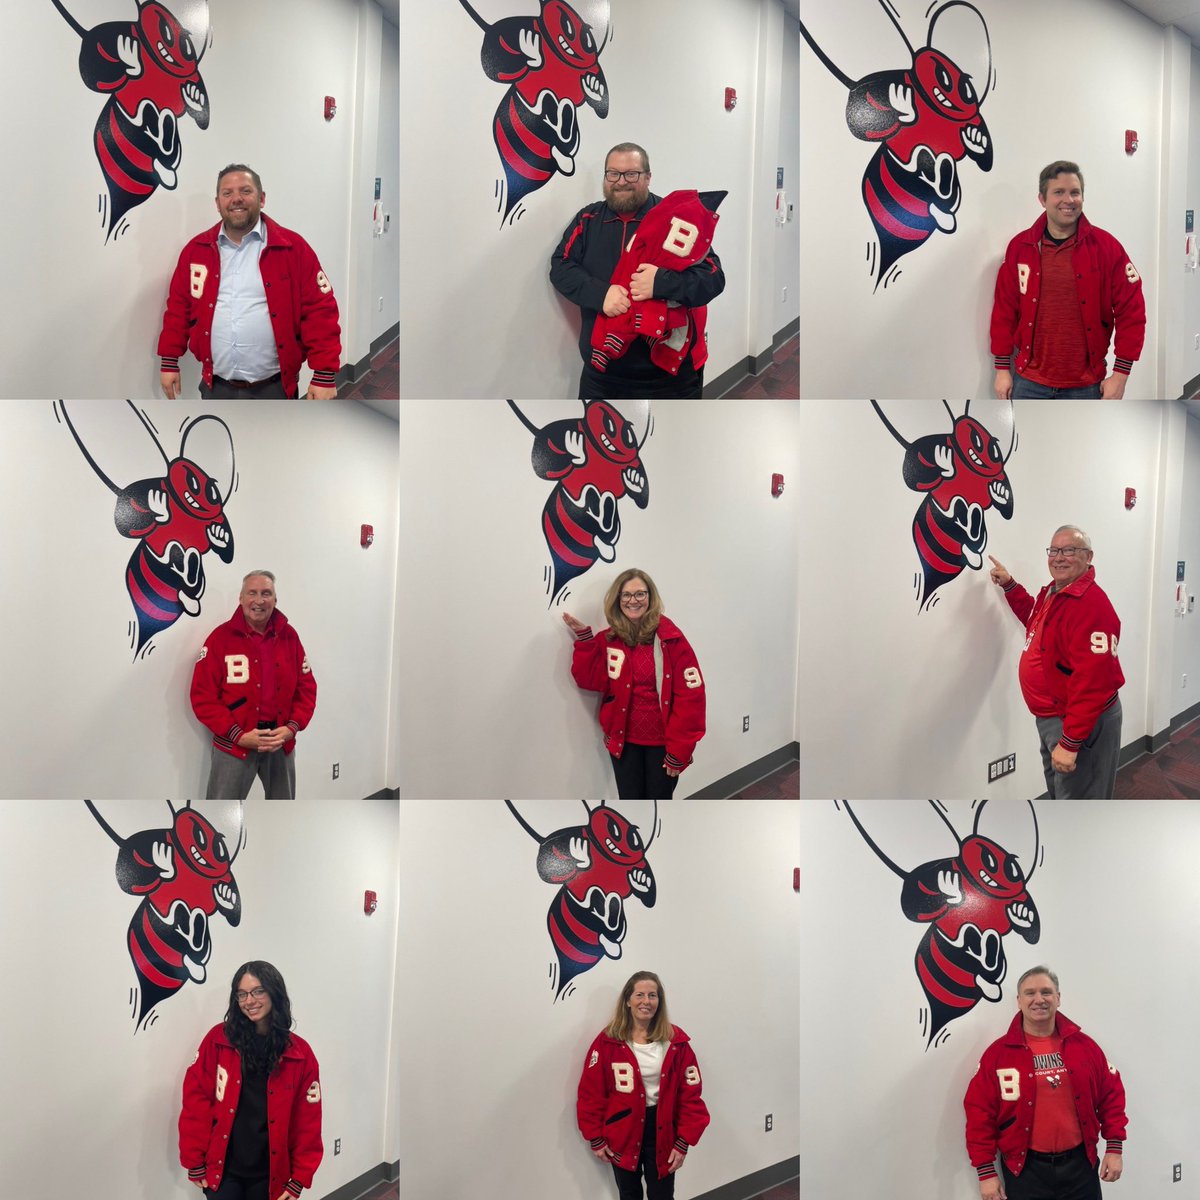 Hey Ryan Gosling, red is the new pink! Go Bees! Superintendent Dr. DeBarbieri and the Board of Education wear the now iconic vintage varsity jacket!